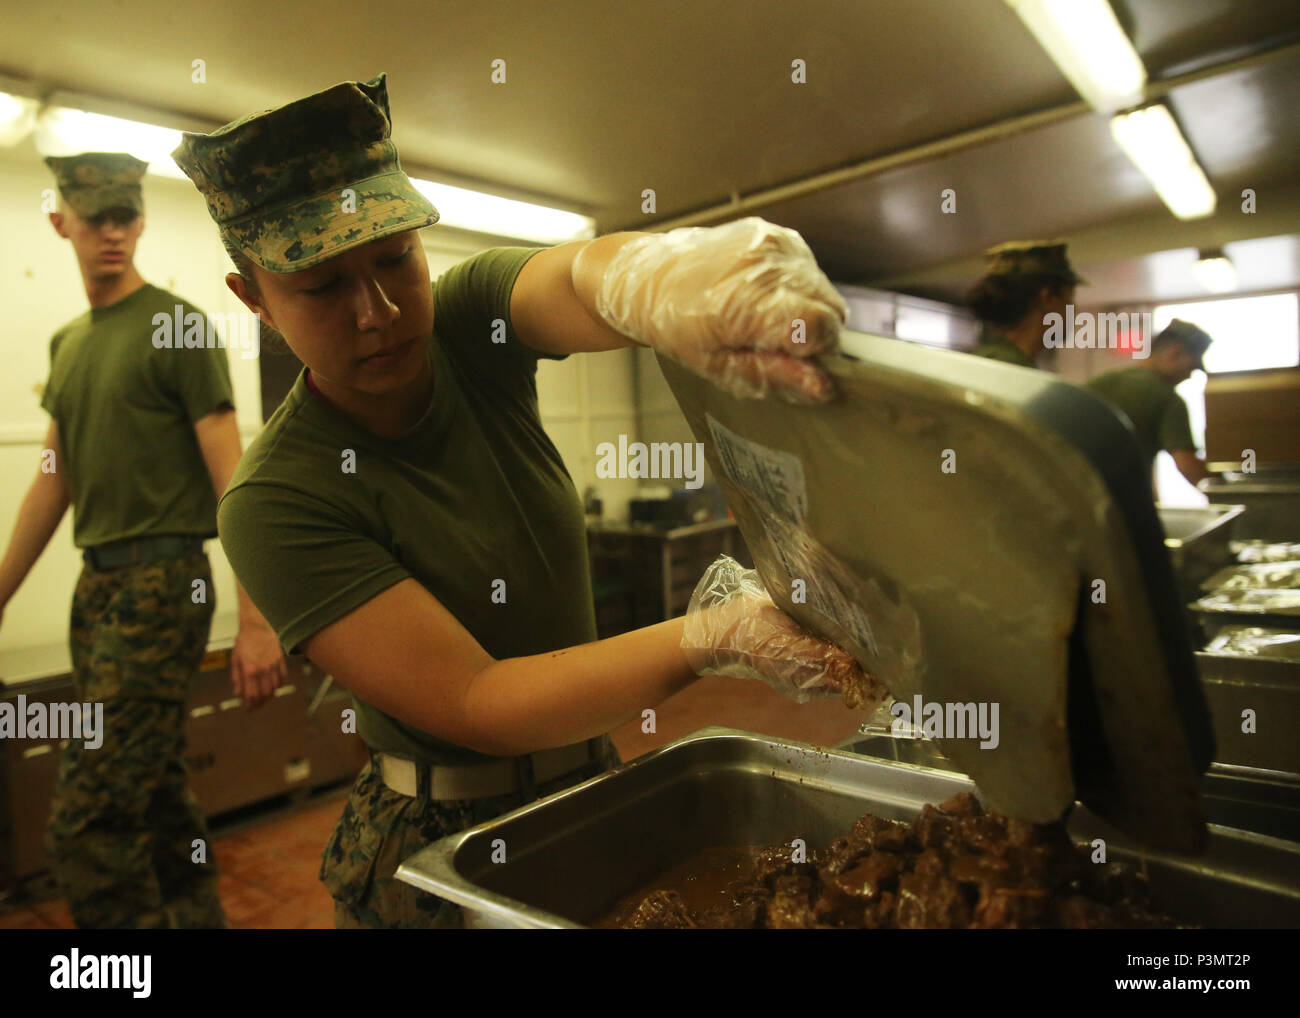 160710-N-ND246-0010 POHAKULOA TRAINING AREA, Hawaii (July 10, 2016) – Lance Cpl. Erika Vargas empties a bag of food into a serving dish at a mess hall in Pohakuloa Training Area, Hawaii, July 10, 2016, during Rim of the Pacific 2016. Twenty-six nations, 49 ships, six submarines, about 200 aircraft, and 25,000 personnel are participating in RIMPAC 16 from June 29 to Aug. 4 in and around the Hawaiian Islands and Southern California. The world’s largest international maritime exercise, RIMPAC provides a unique training opportunity while fostering and sustaining cooperative relationships between p Stock Photo